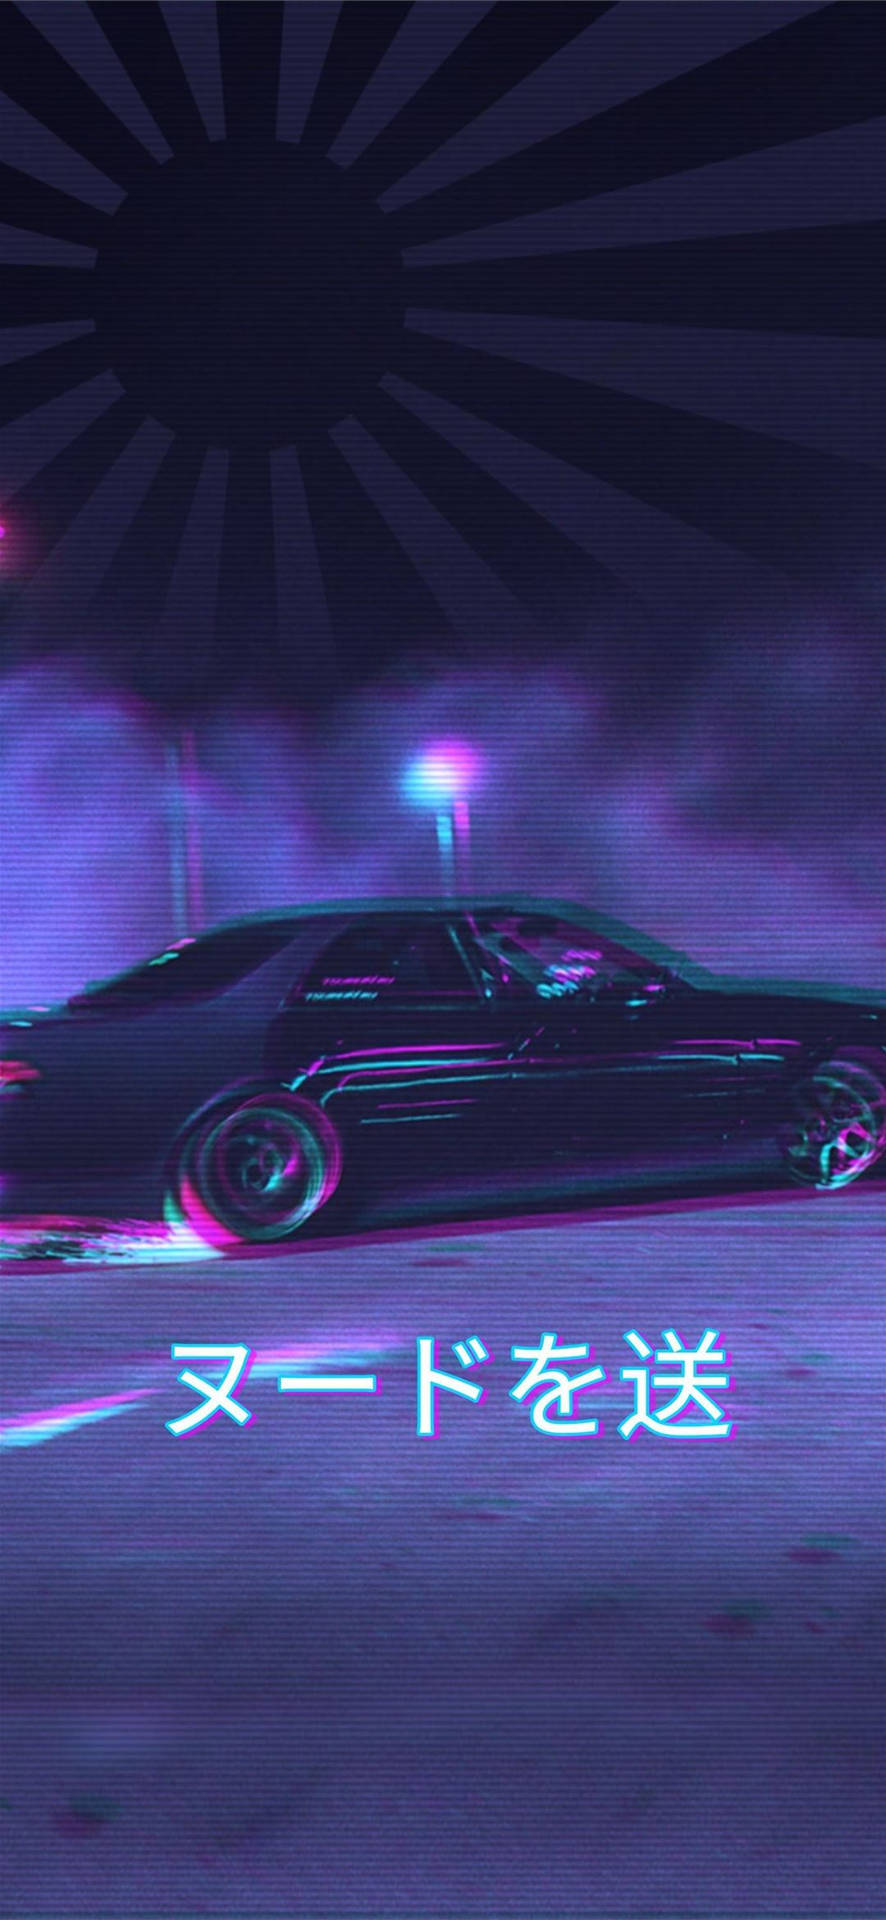 Classic Jdm Aesthetic With Flag Wallpaper